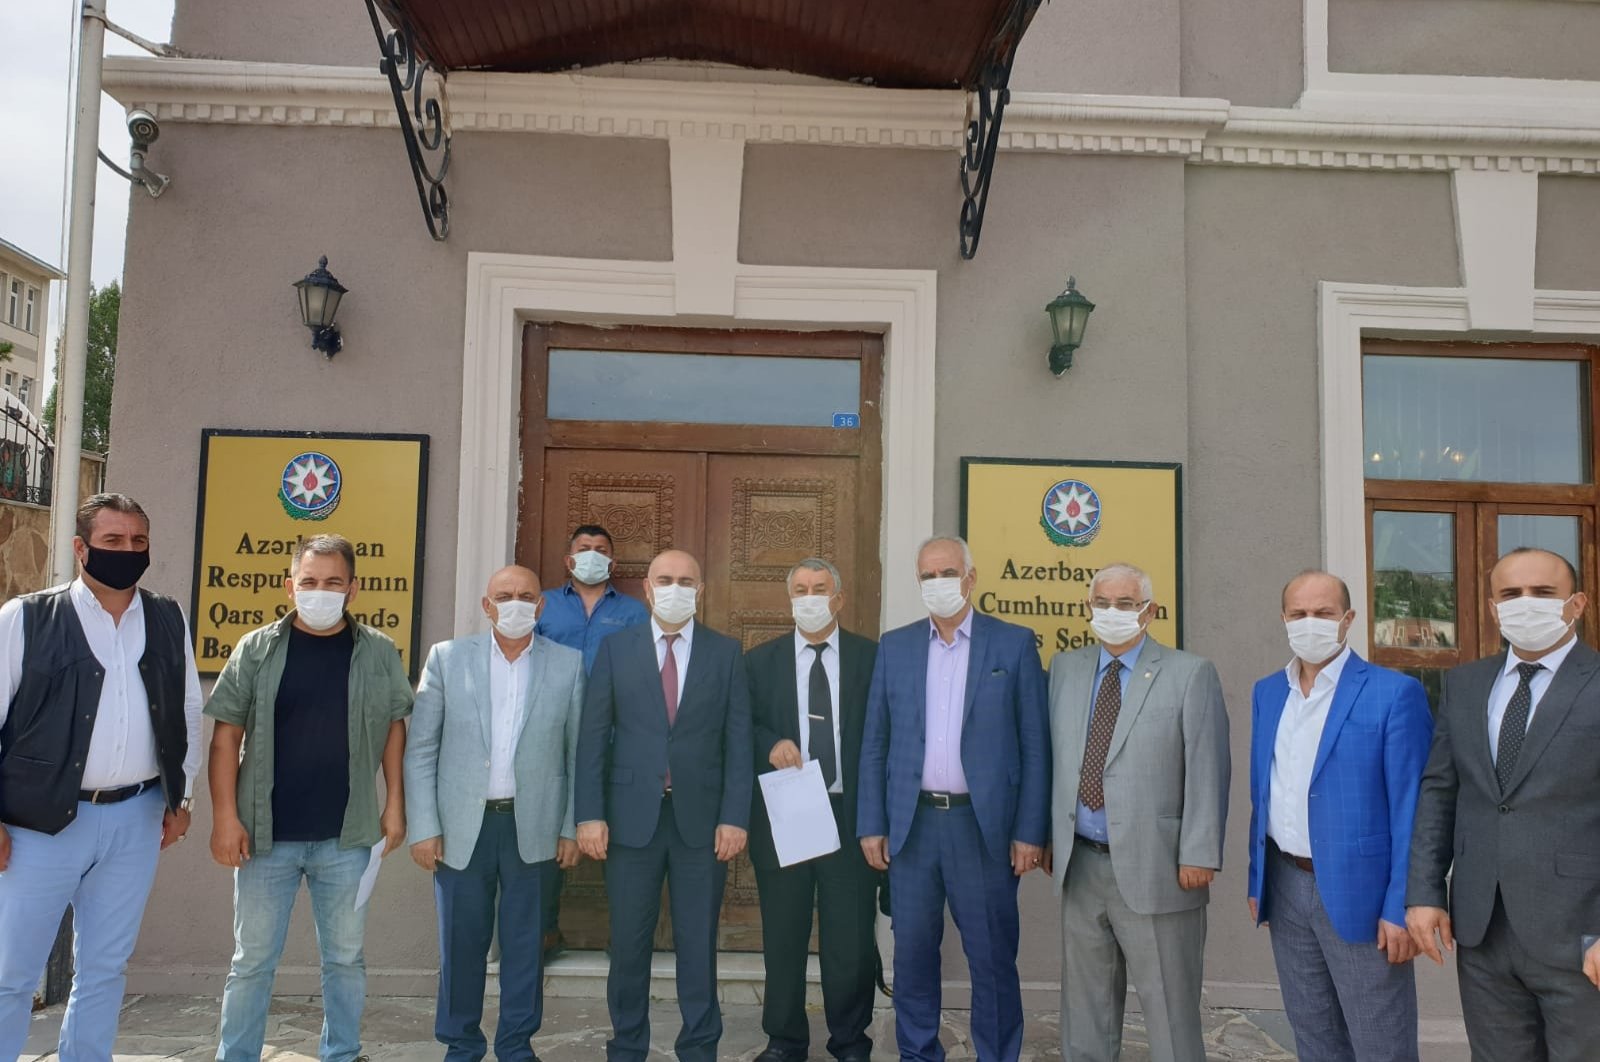 Representatives of several Turkish NGOs pose in front of the consulate-general of Azerbaijan in Kars after volunteering to fight alongside Azerbaijani forces, Kars, Oct. 4, 2020. (DHA)